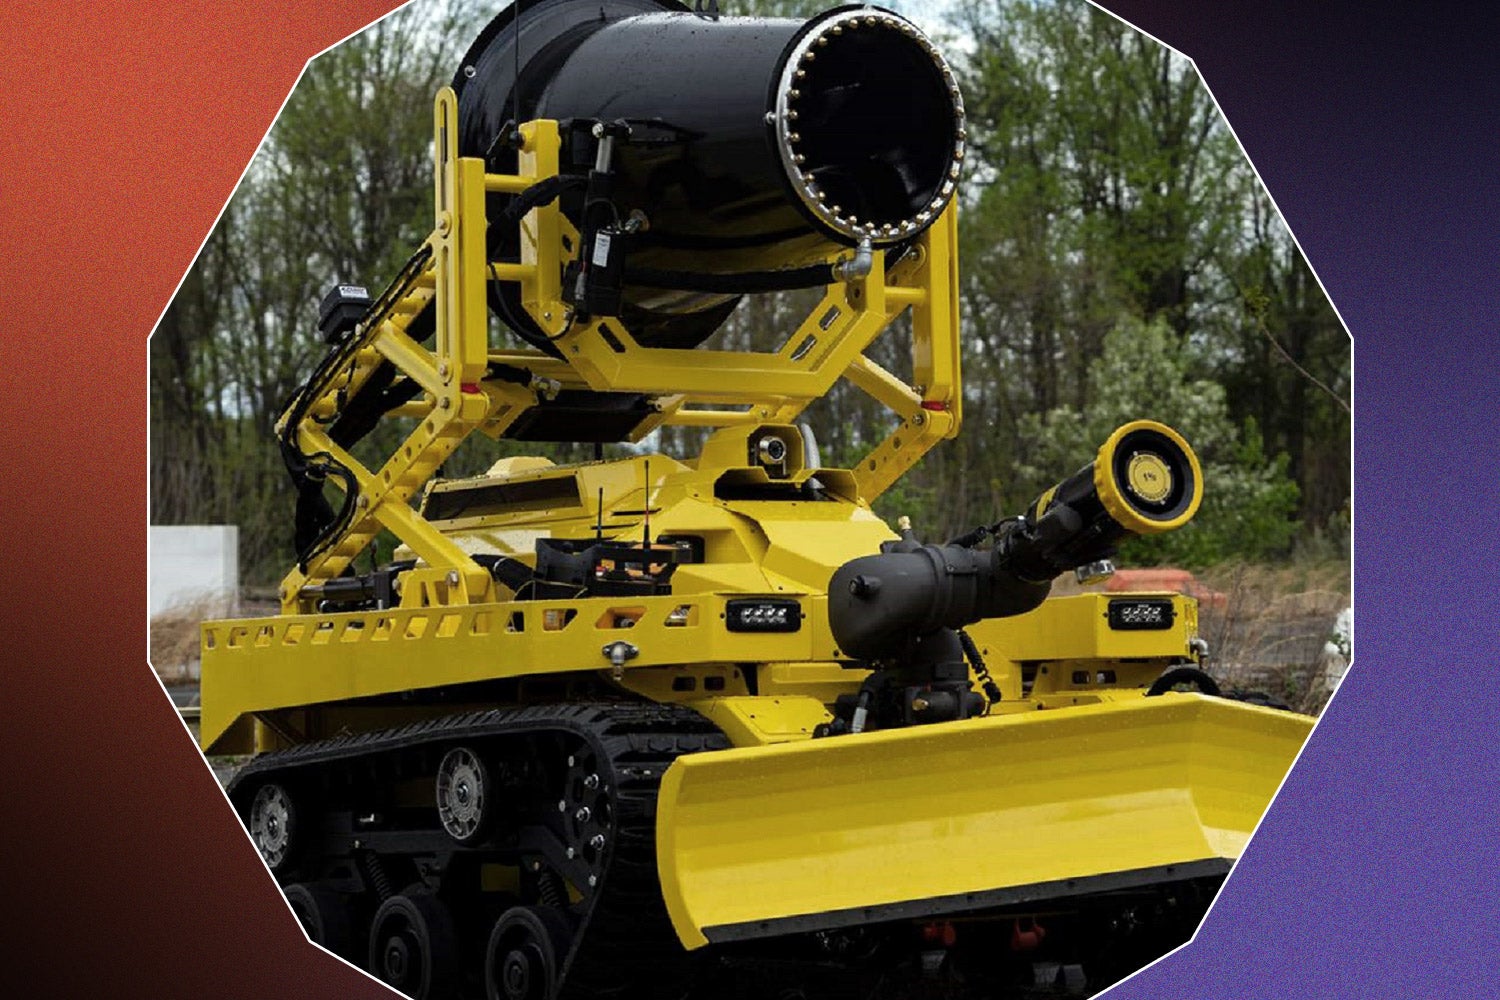 Yellow Thermite RS3 firefighting vehicle on a red, black and purple background